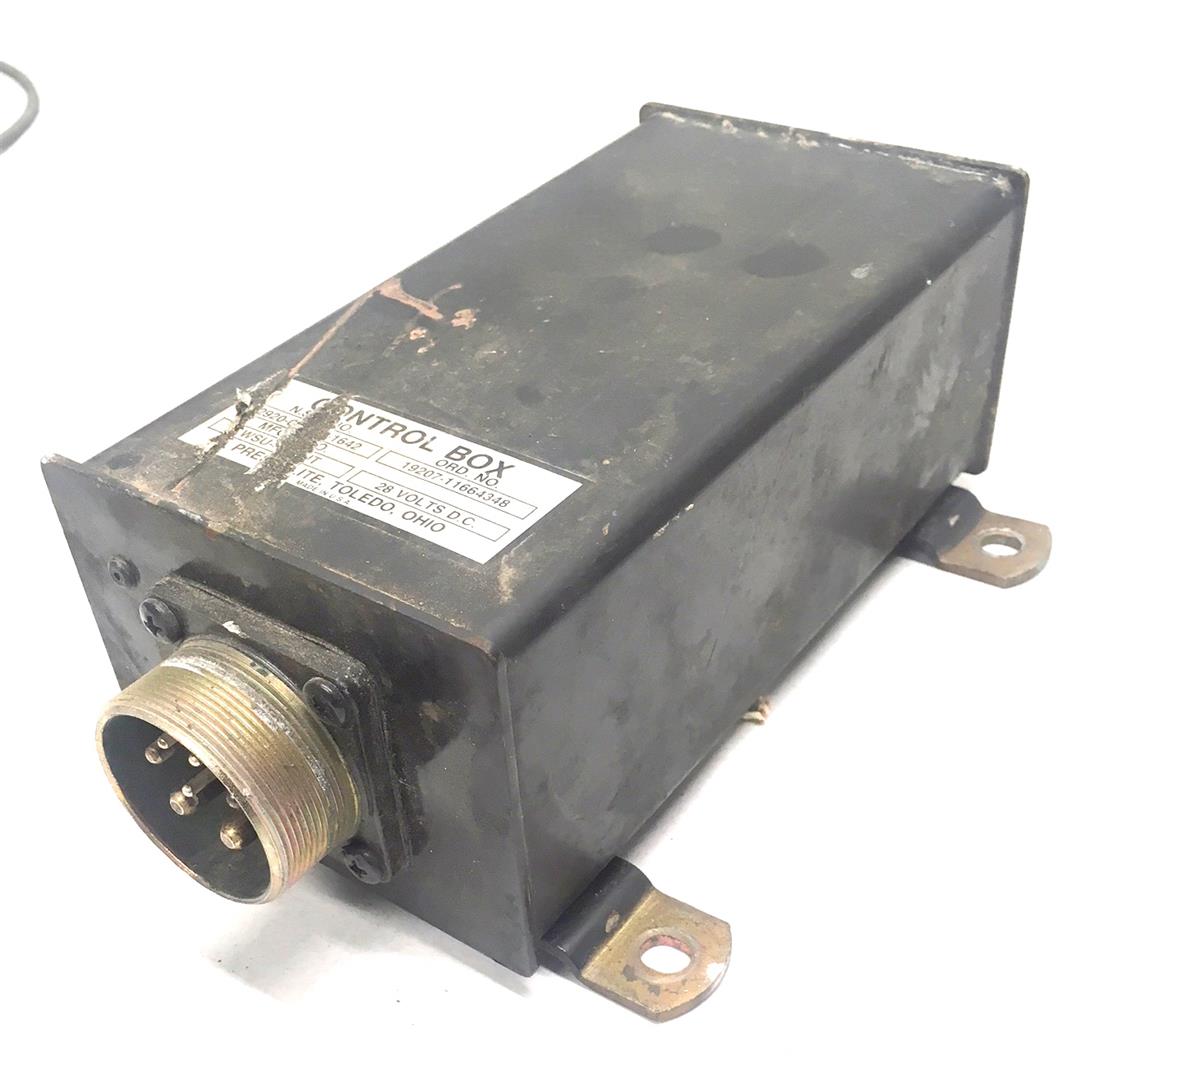 5T-504 | 5T-504 Electrical Power Control Box (USED) (3).JPG